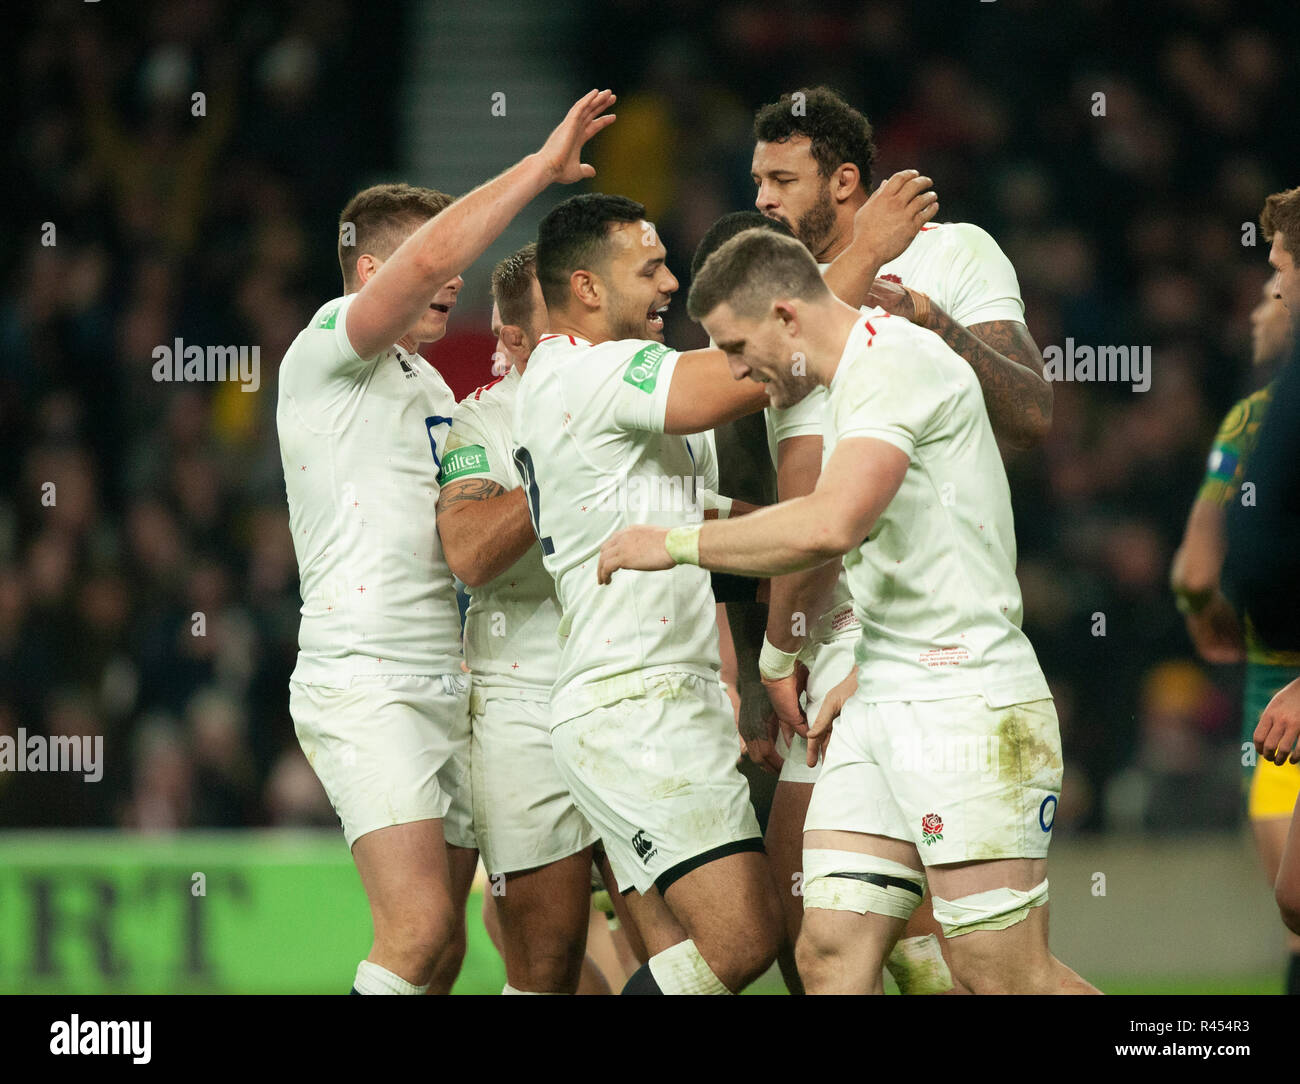 Twickenham, UK. 24th November 2018. England players celebrate a try during the Quilter International Rugby match between England and Australia. Andrew Taylor/Alamy Live News Stock Photo